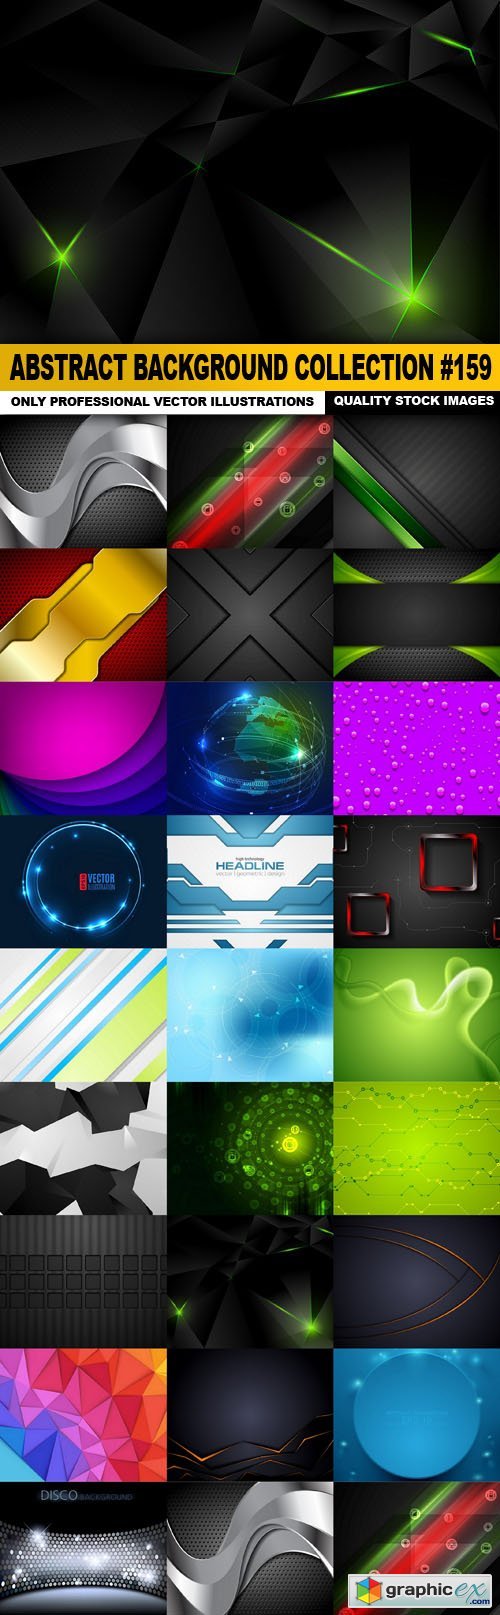 Abstract Background Collection #159 - 25 Vector